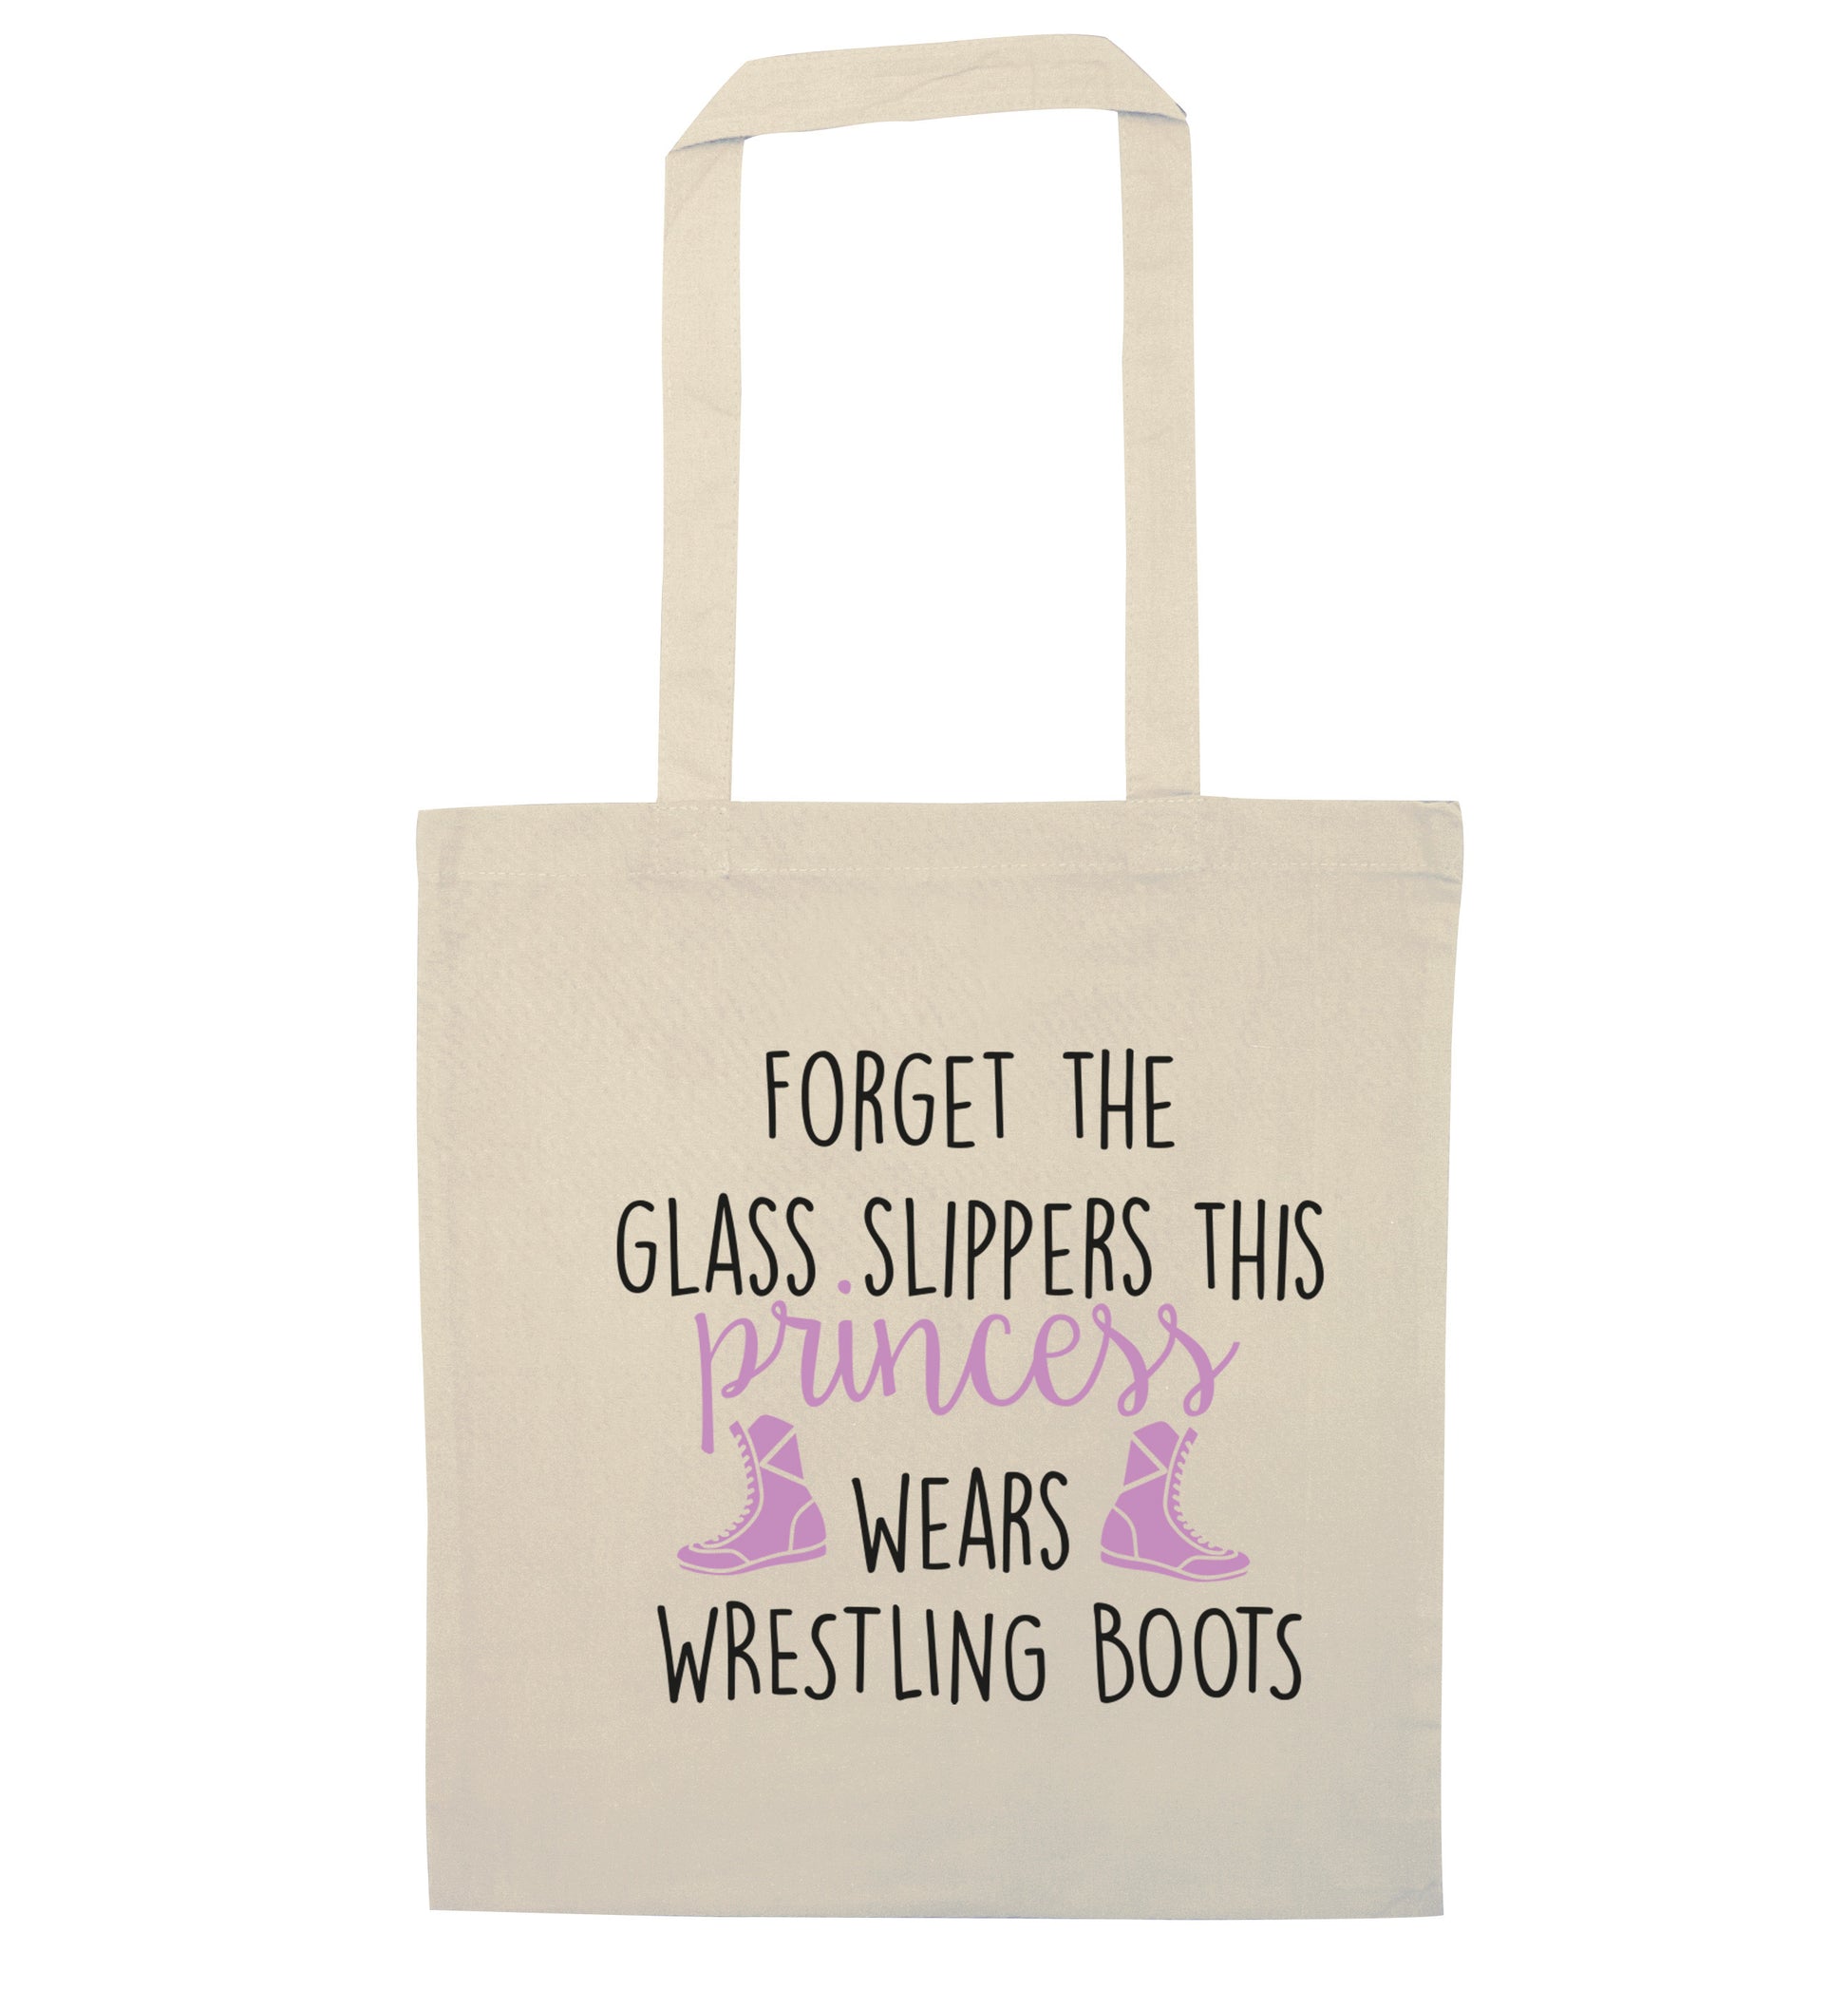 Forget the glass slippers this princess wears wrestling boots natural tote bag